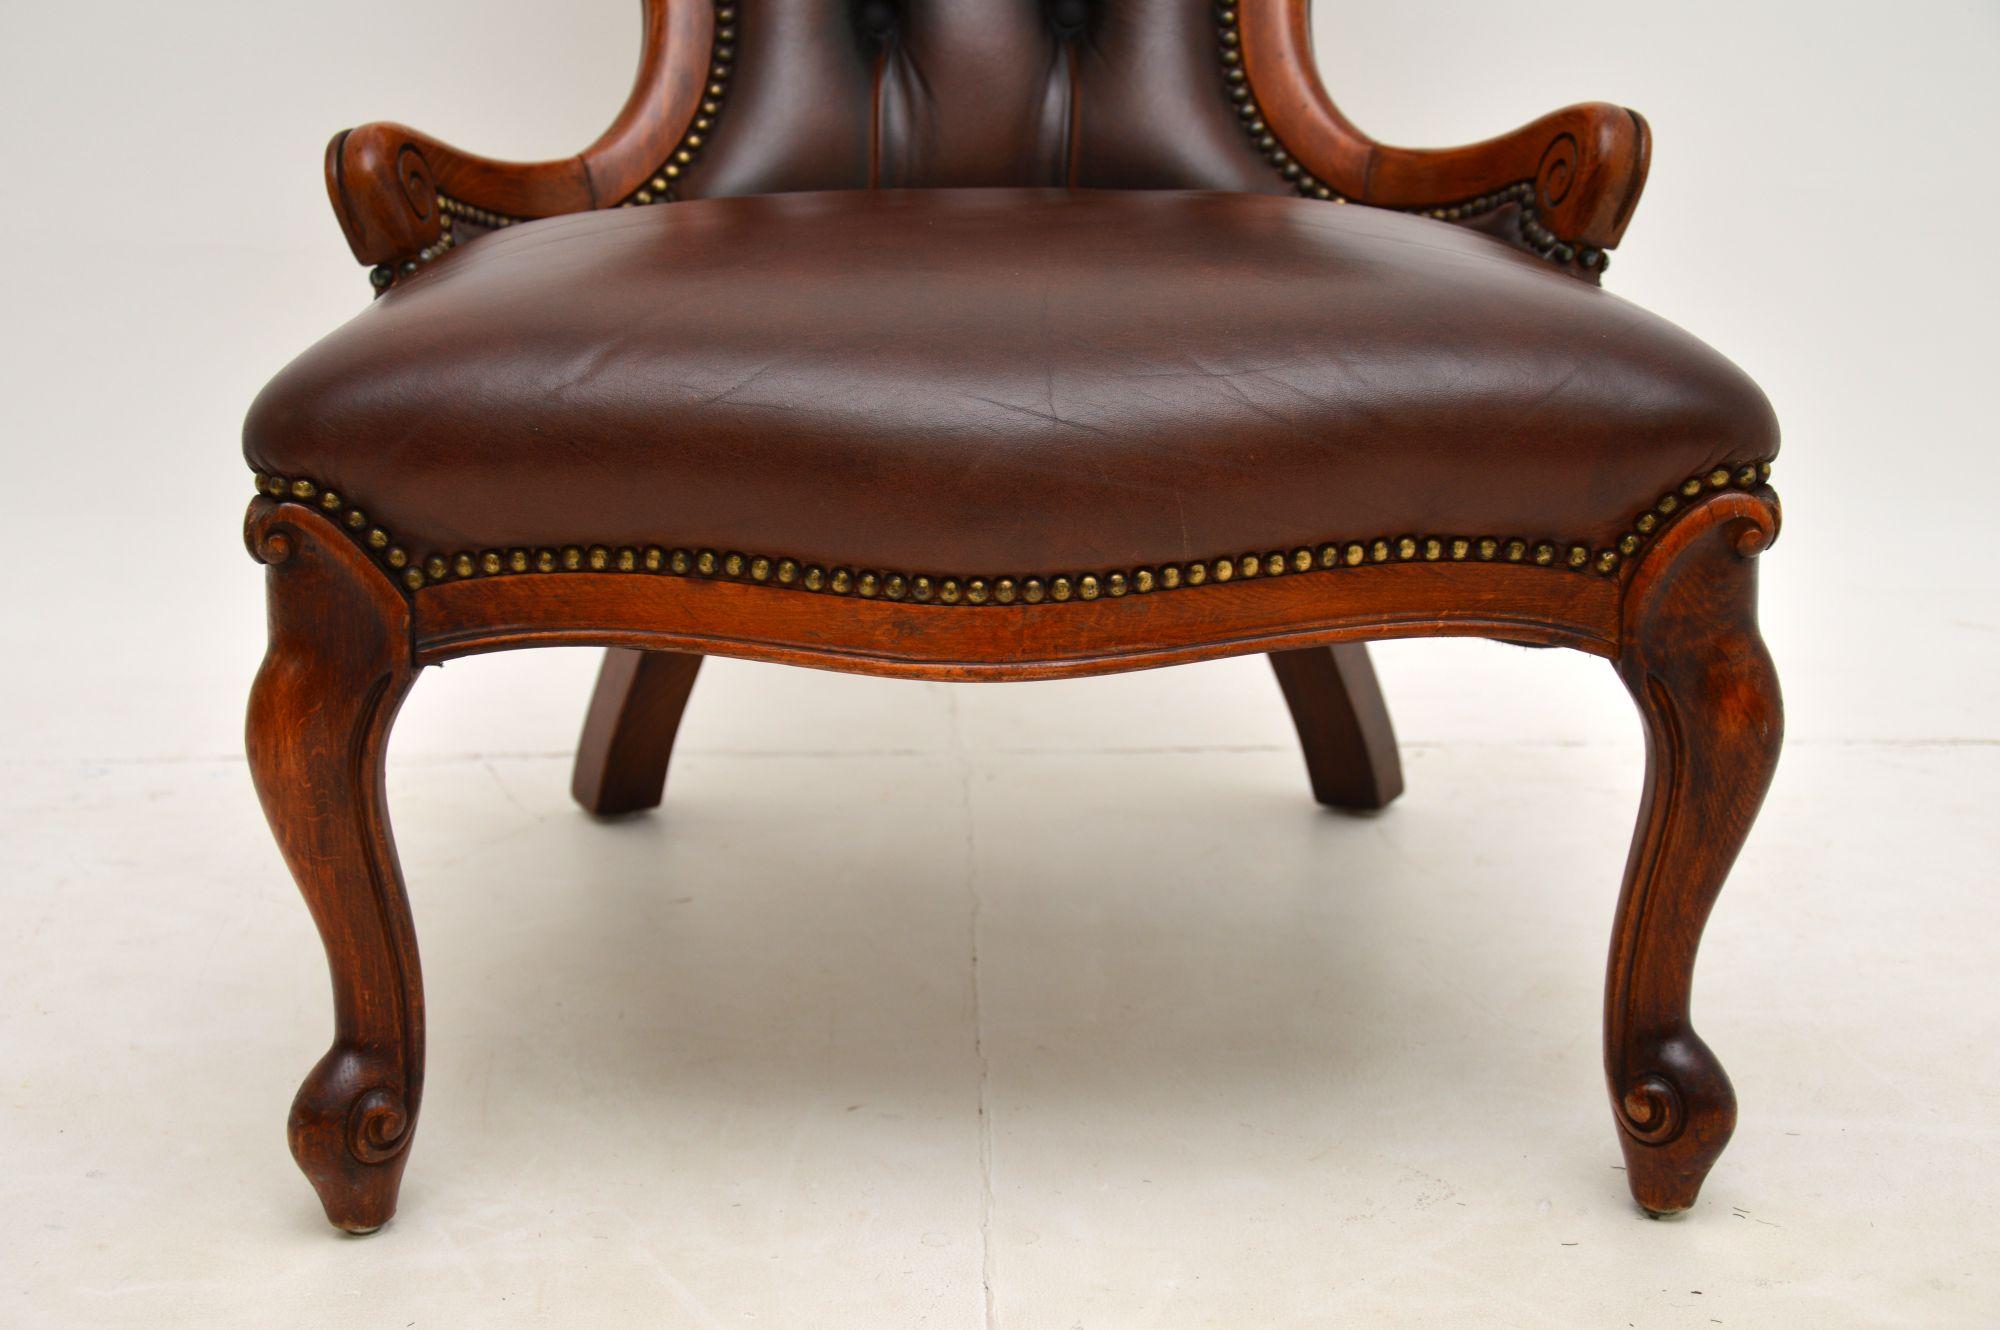 Wood Antique Victorian Style Leather Spoon Back Chair